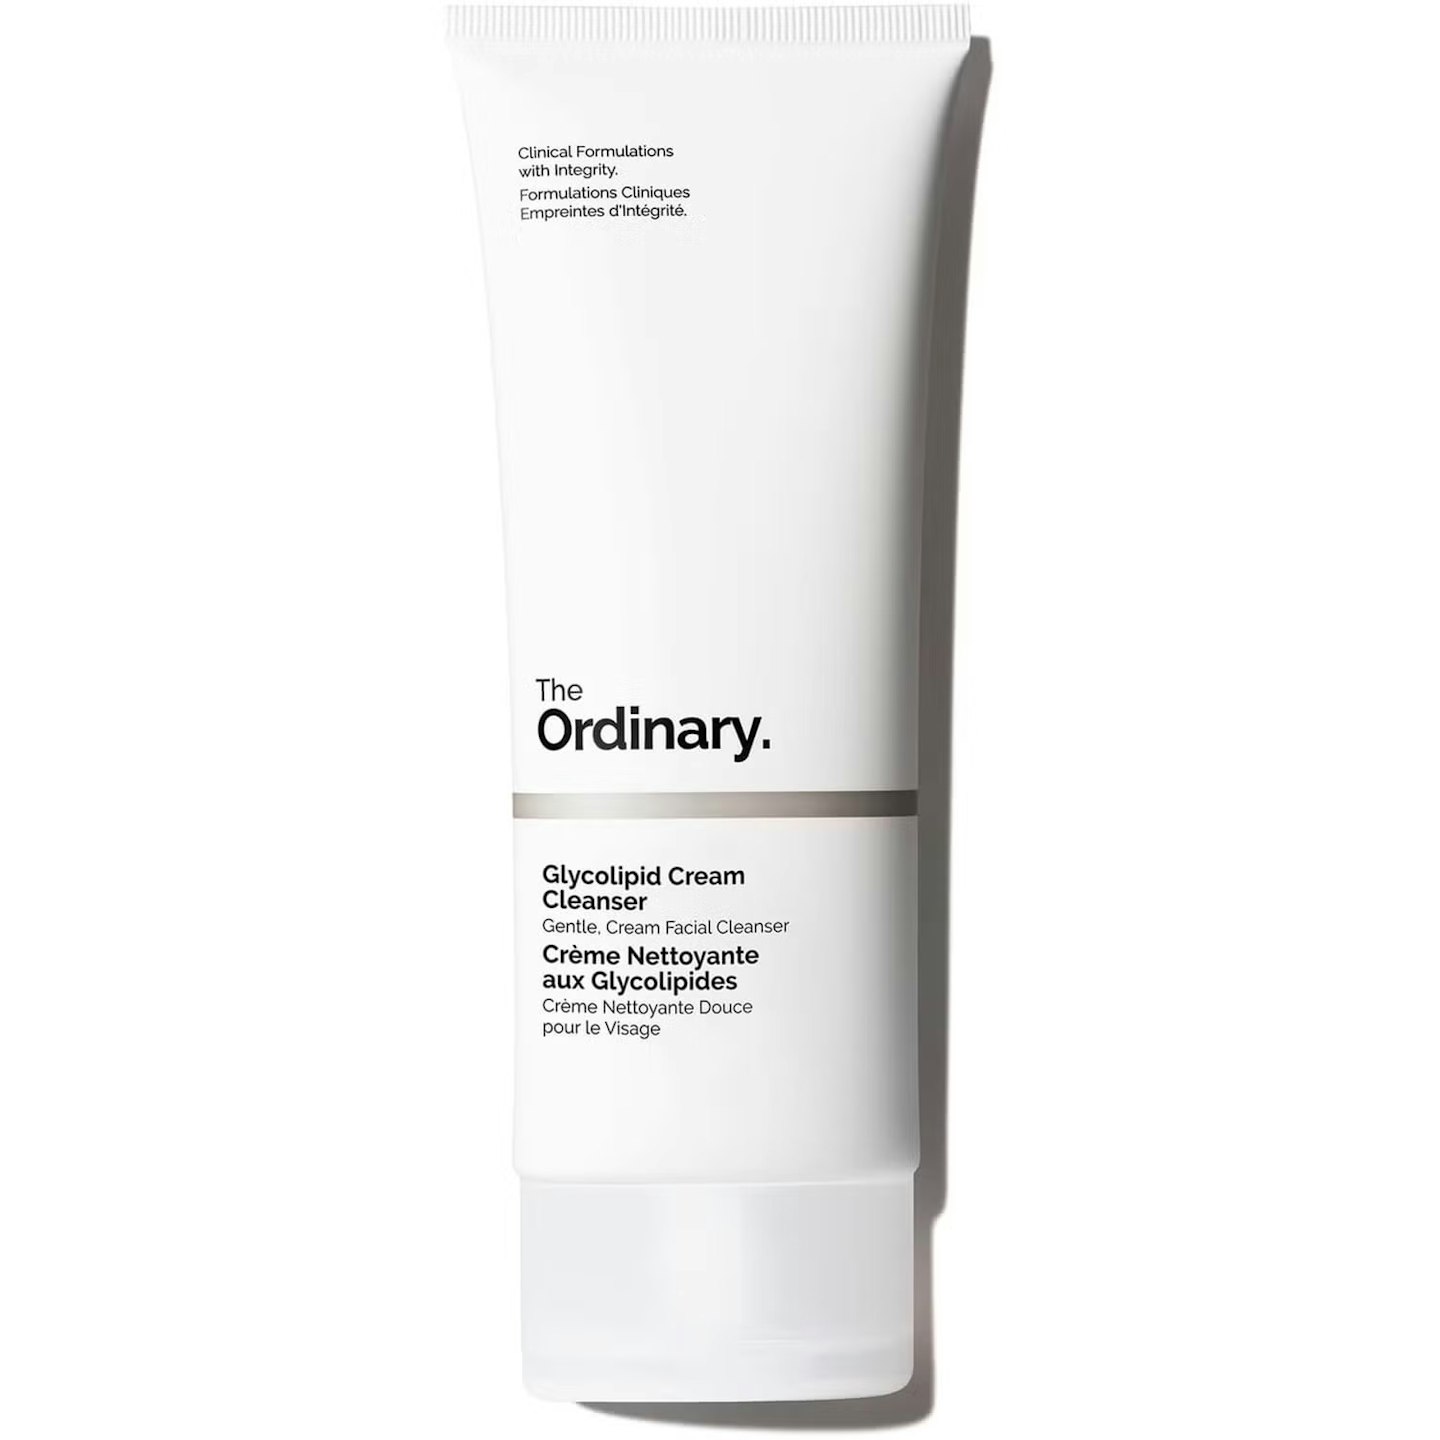 The Ordinary Glycolic Cream Cleanser